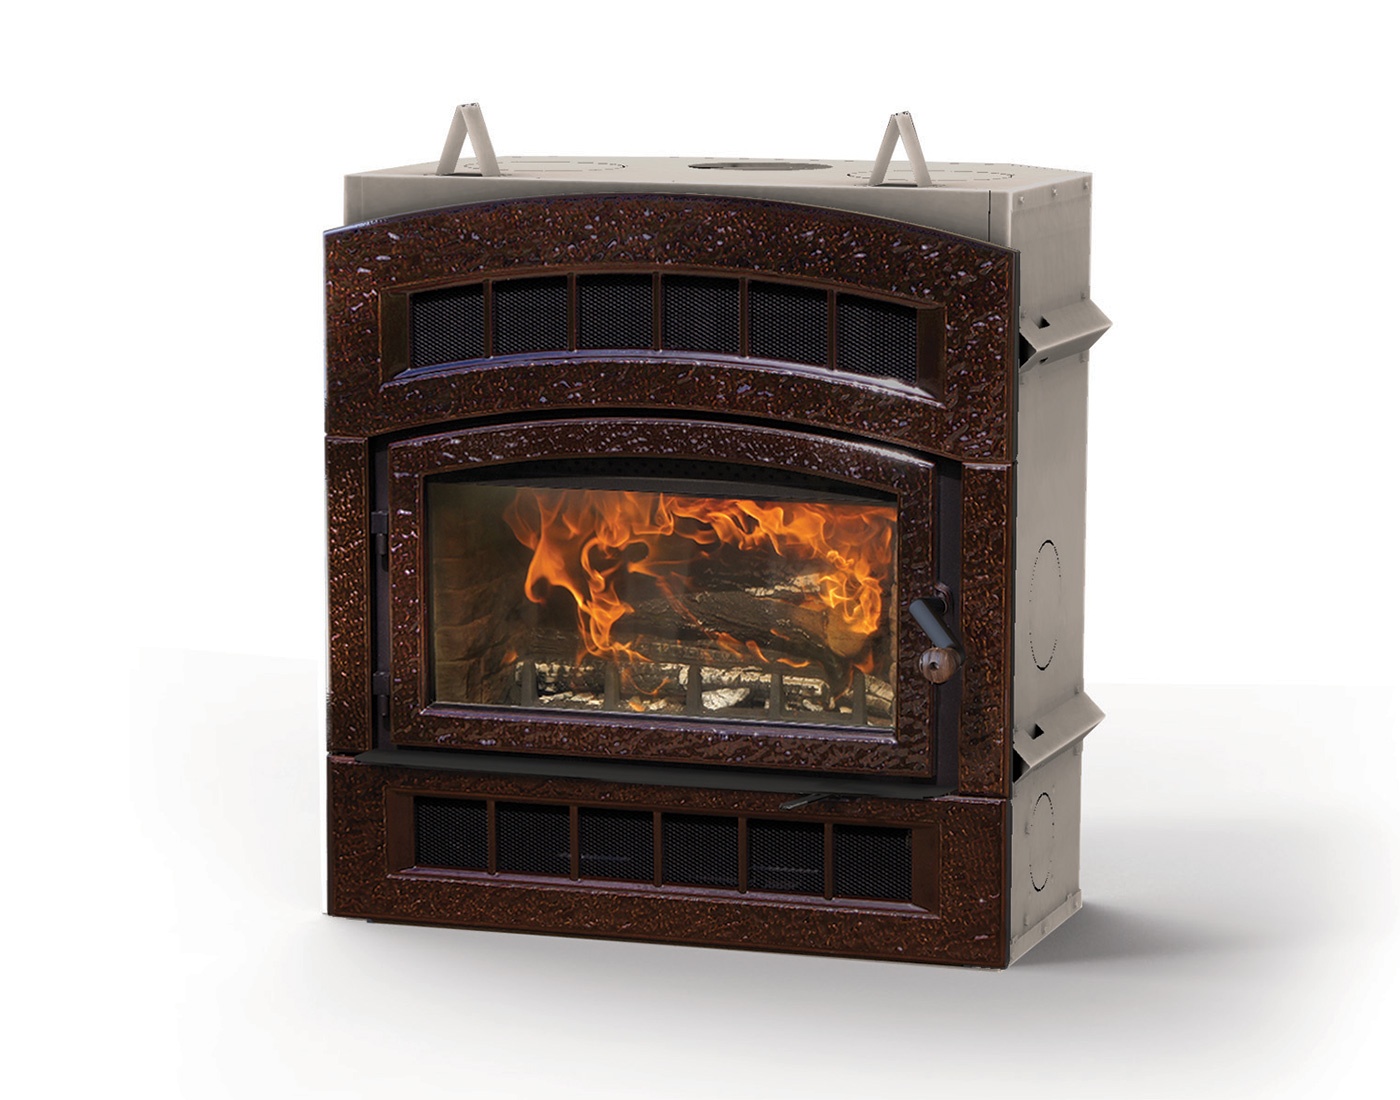 Wfp 75 Hearthstone Stoves, Zero Clearance Fireplace Screen Doors